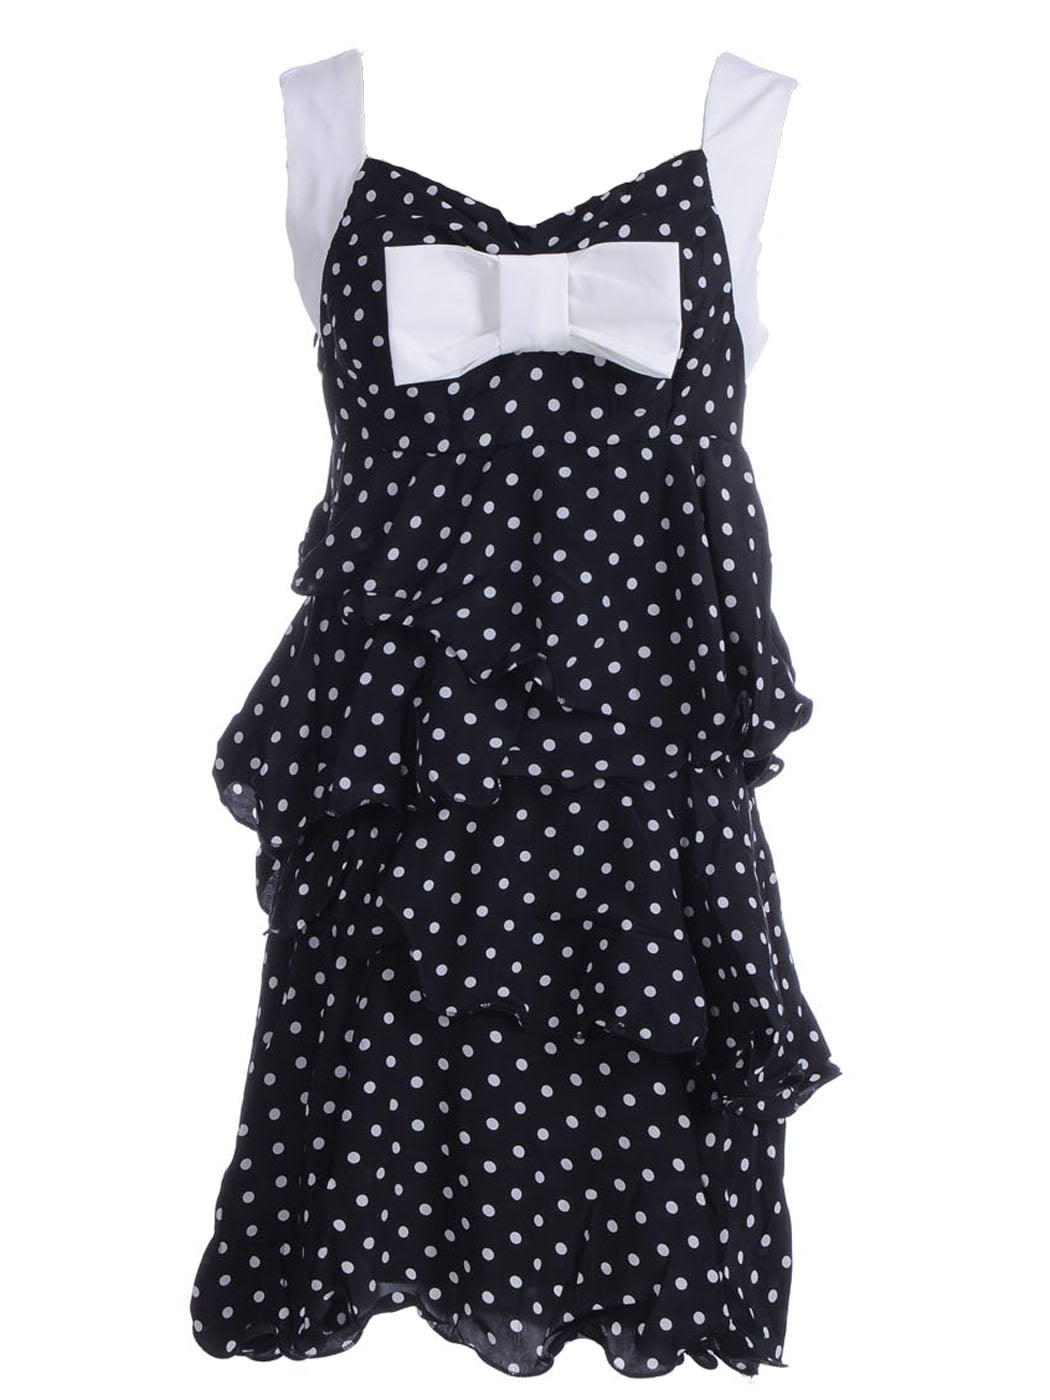 S/M Fit Black and White Polka Dot Tiered Ruffle Bow Front Trim Dress ...